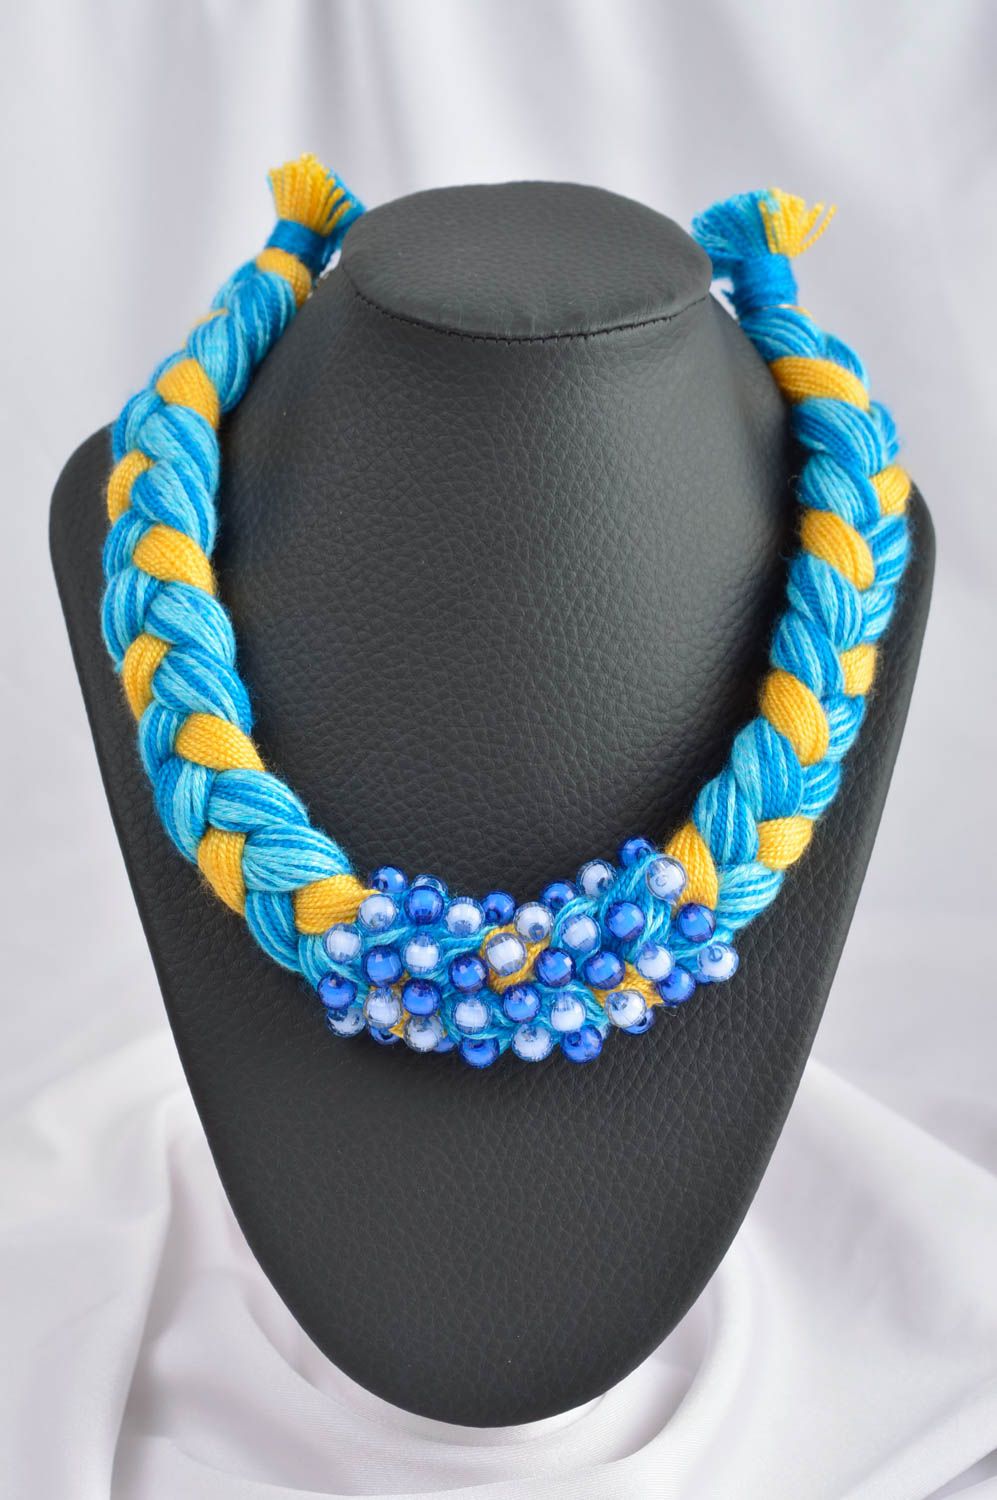 Stylish handmade textile necklace fashion trends for girls cool jewelry photo 1